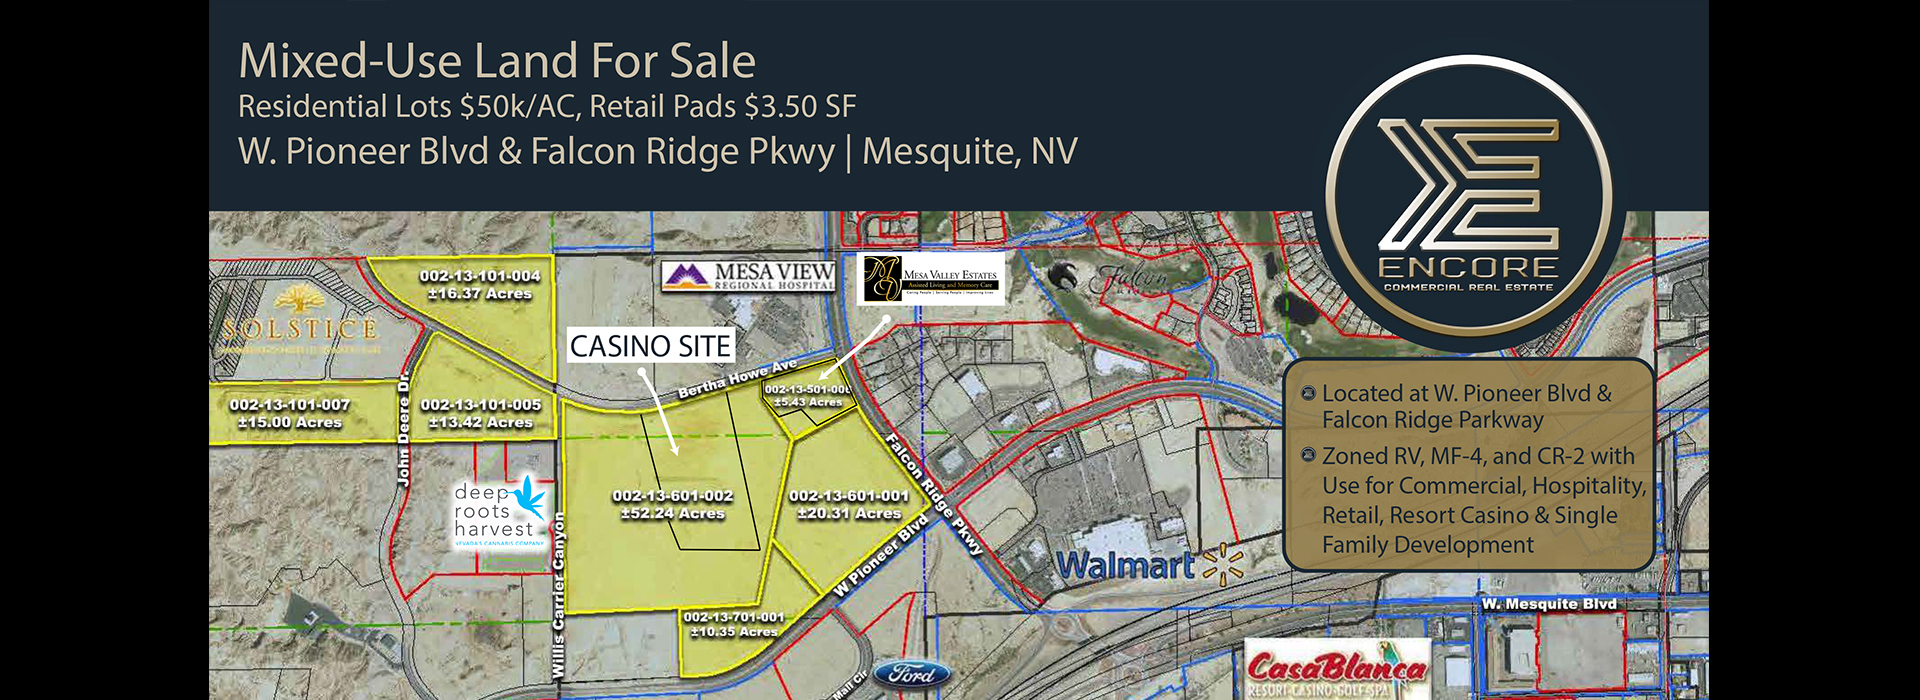 <small>MIXED USE LAND FOR SALE</small>W. PIONEER BLVD. & FALCON RIDGE MESQUITE NV.